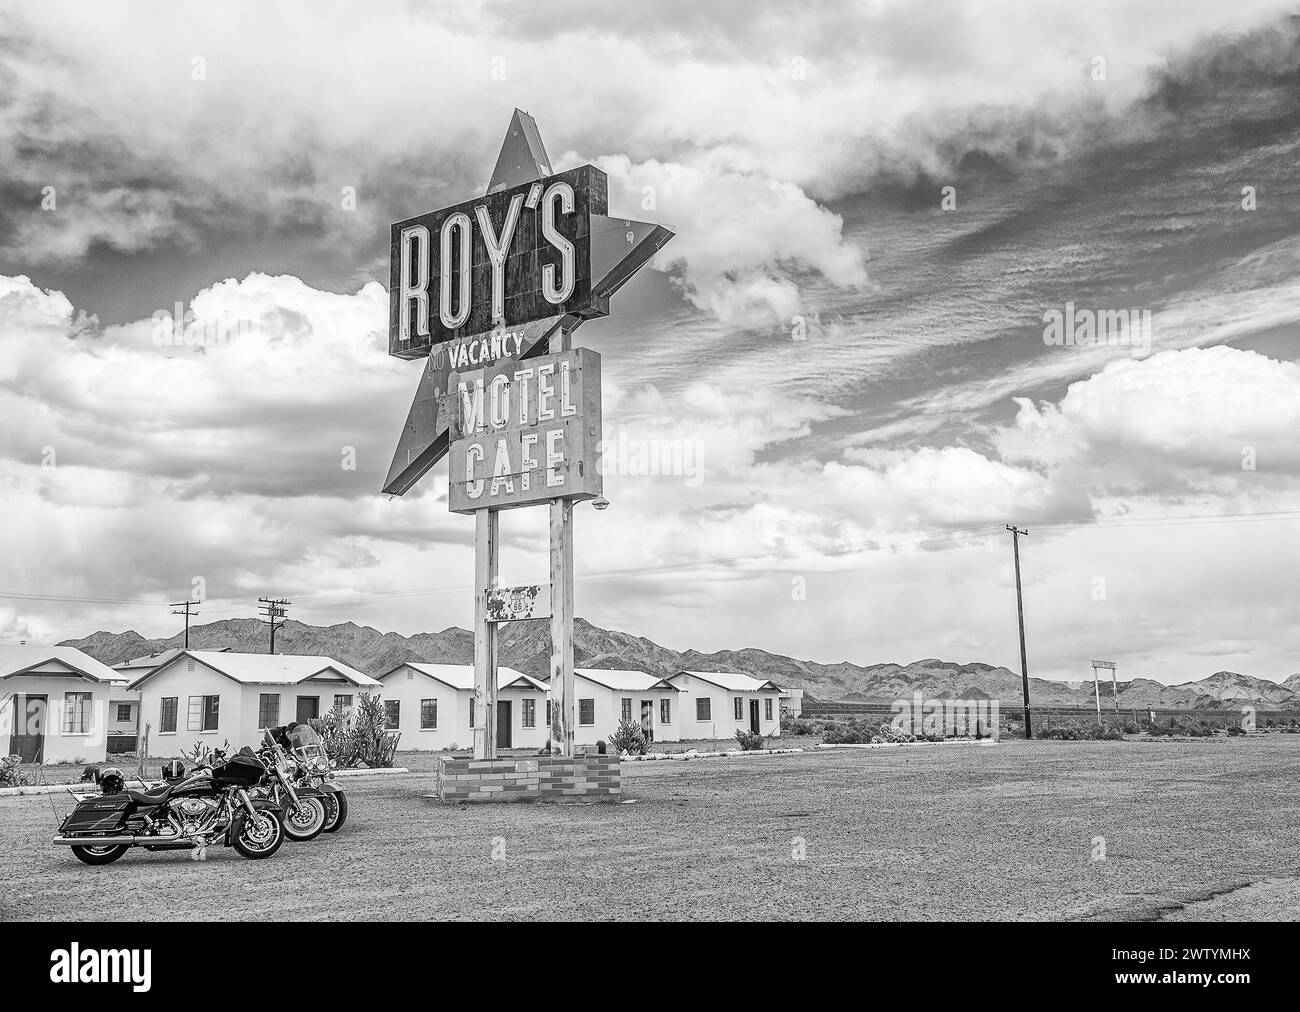 Iconic Roy's Motel & Café in Amboy on Route 66 in the Mojave desert, California Stock Photo